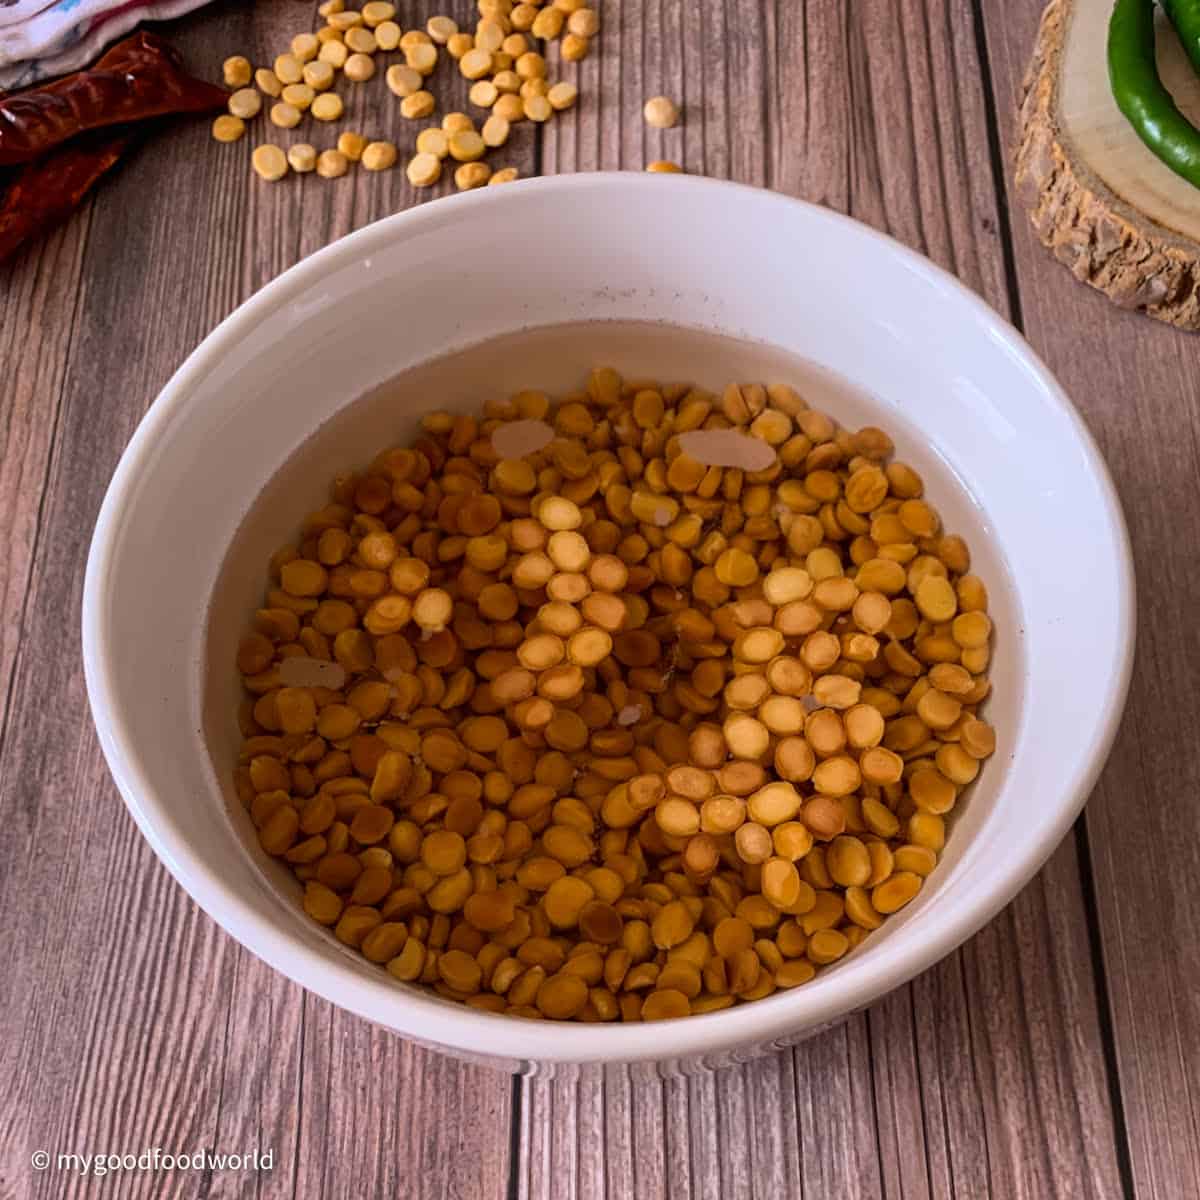 Roasted chickpea lentils are soaking in water in a round white bowl. The bowl is placed on a patterned brown backdrop with some unroasted chana dal and chilies placed on the backdrop.